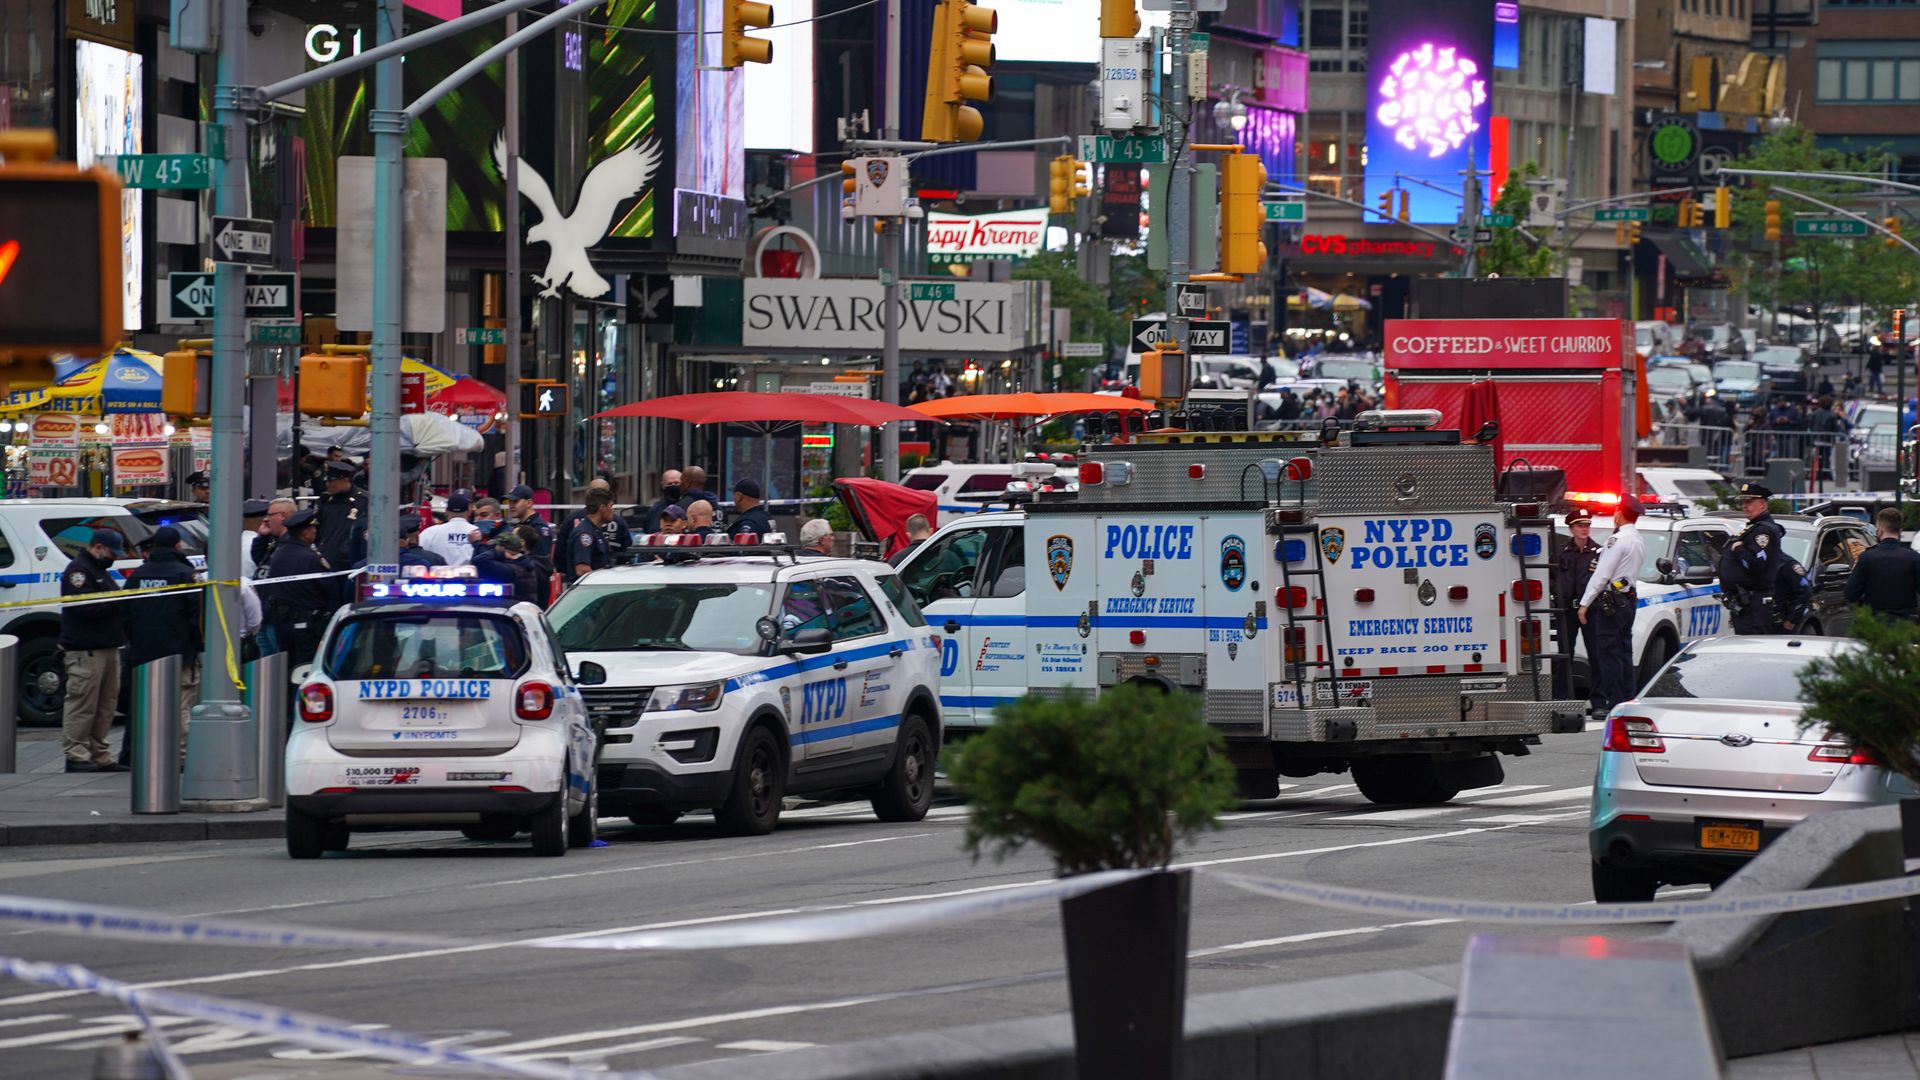 Police officers are seen in Times Square on May 8, 2021 in New York City.